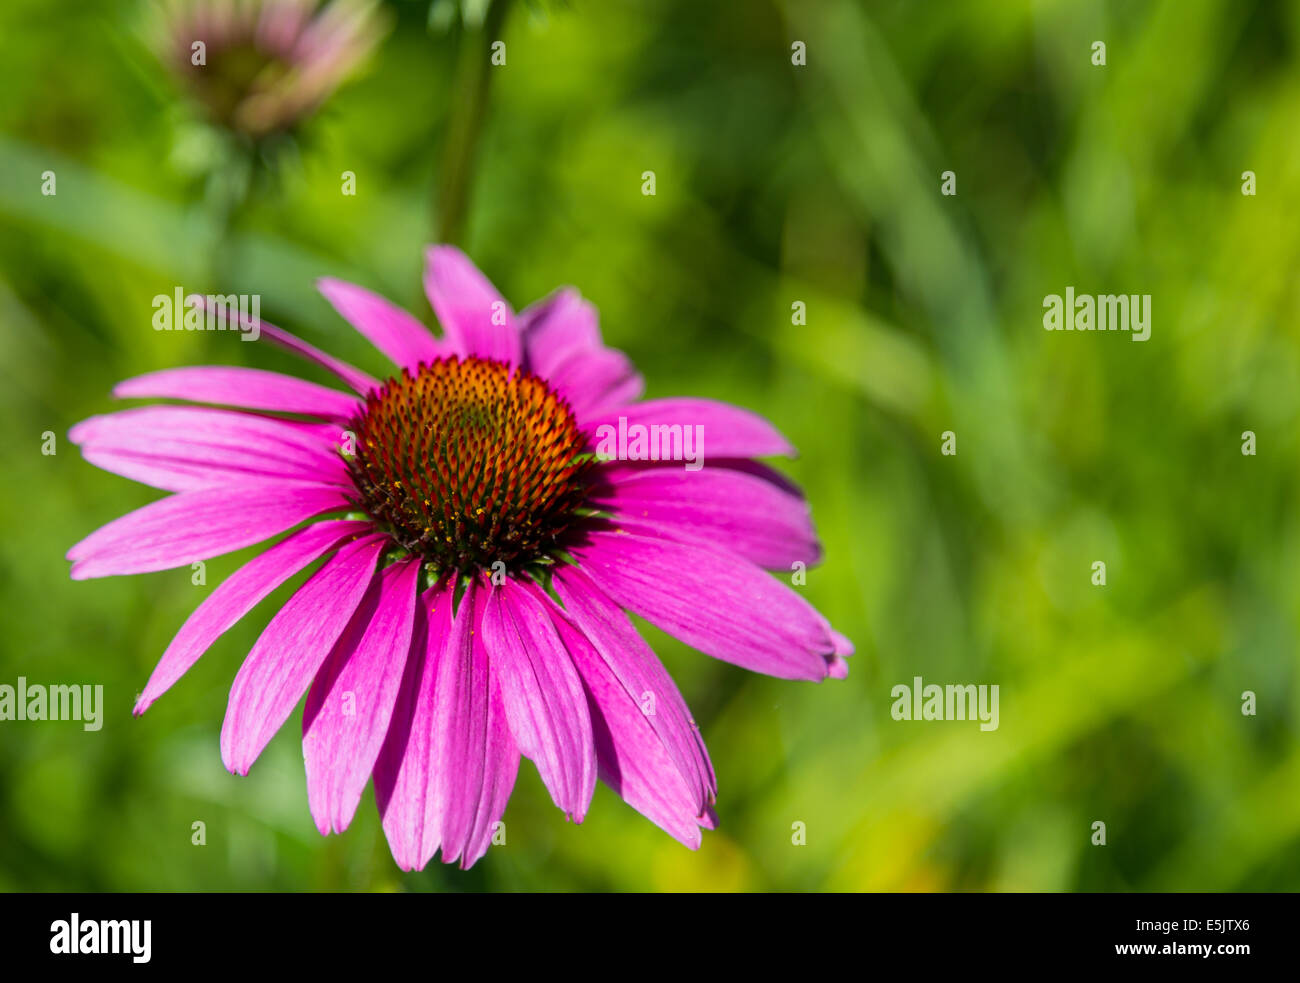 Closeup to a Purple coneflower during the day Stock Photo